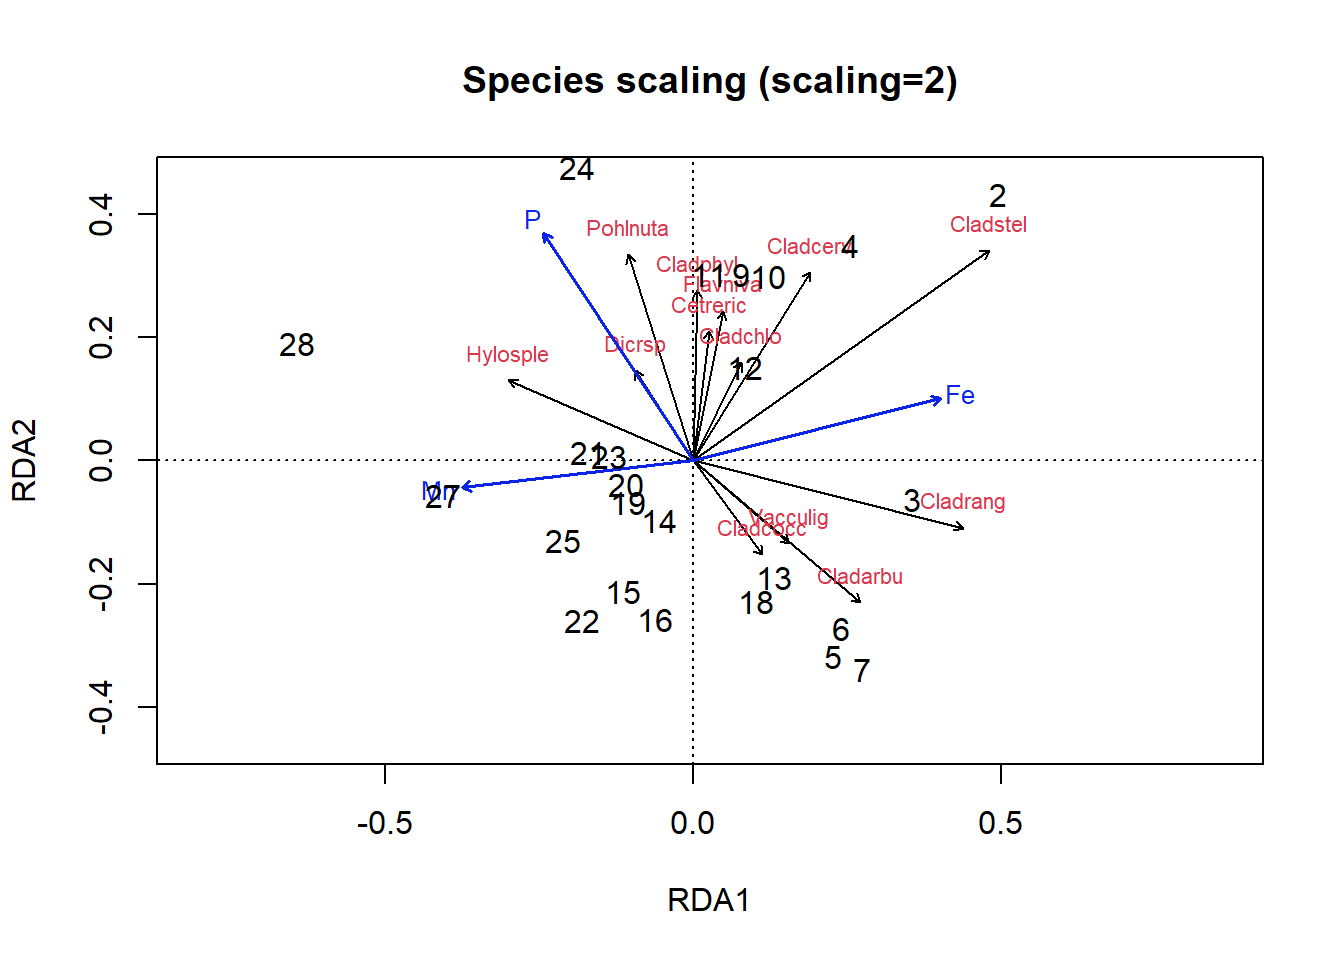 A plot similar to the previous with different scaling based on species.